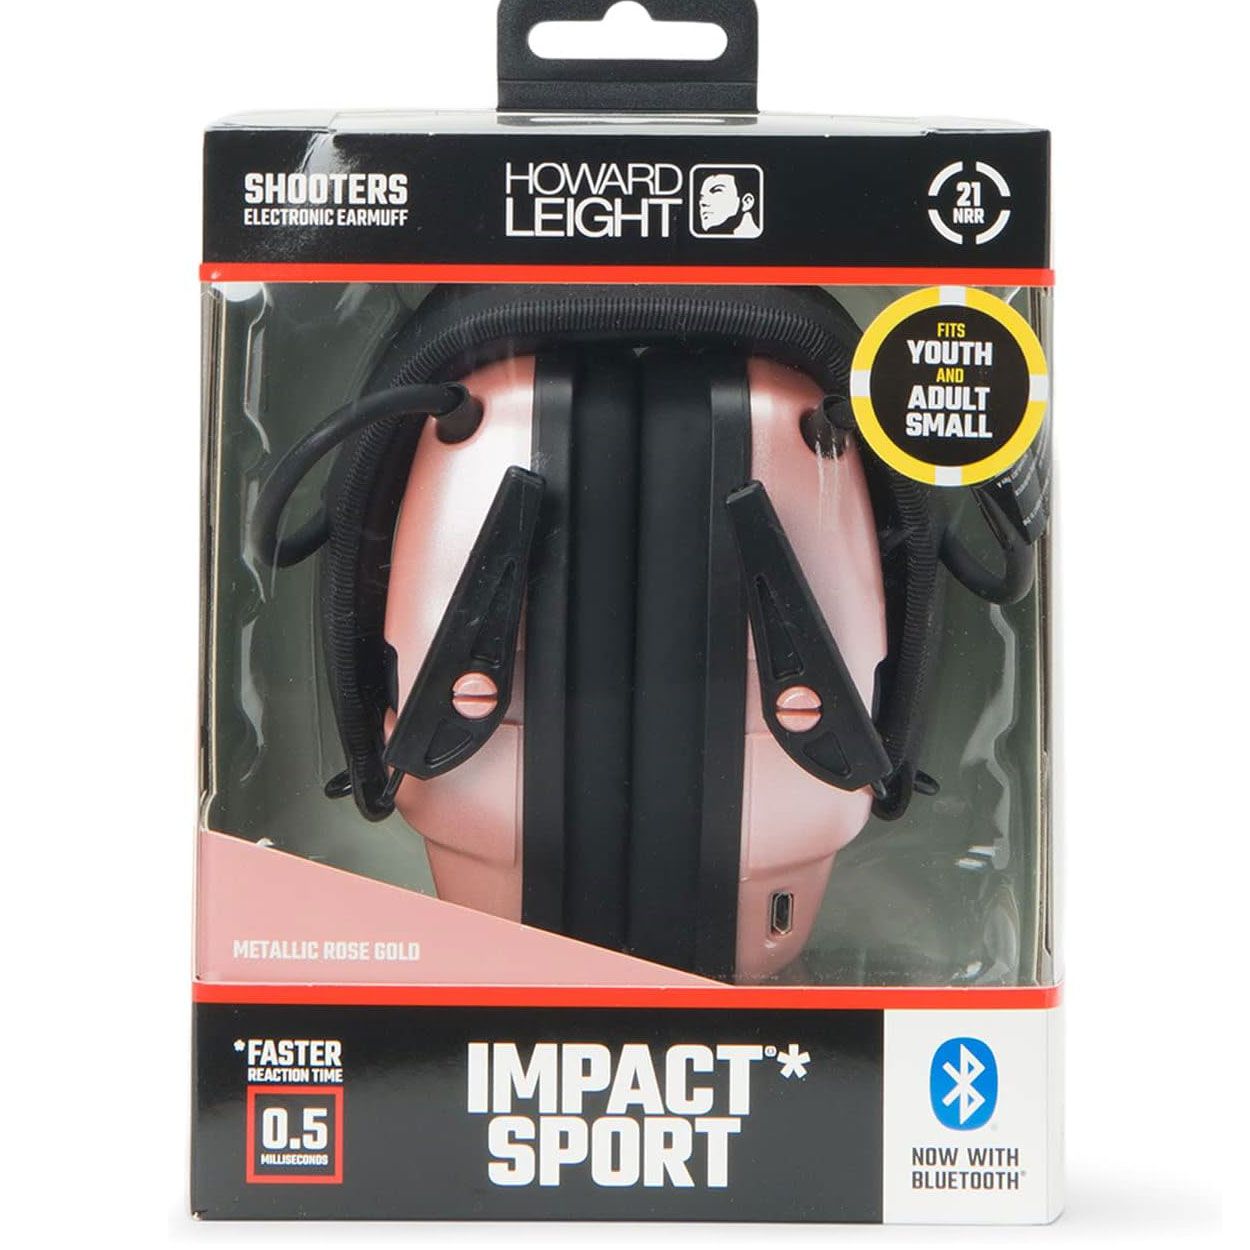 Howard Leight Impact Sport Earmuff with Bluetooth, Rose Gold, Small